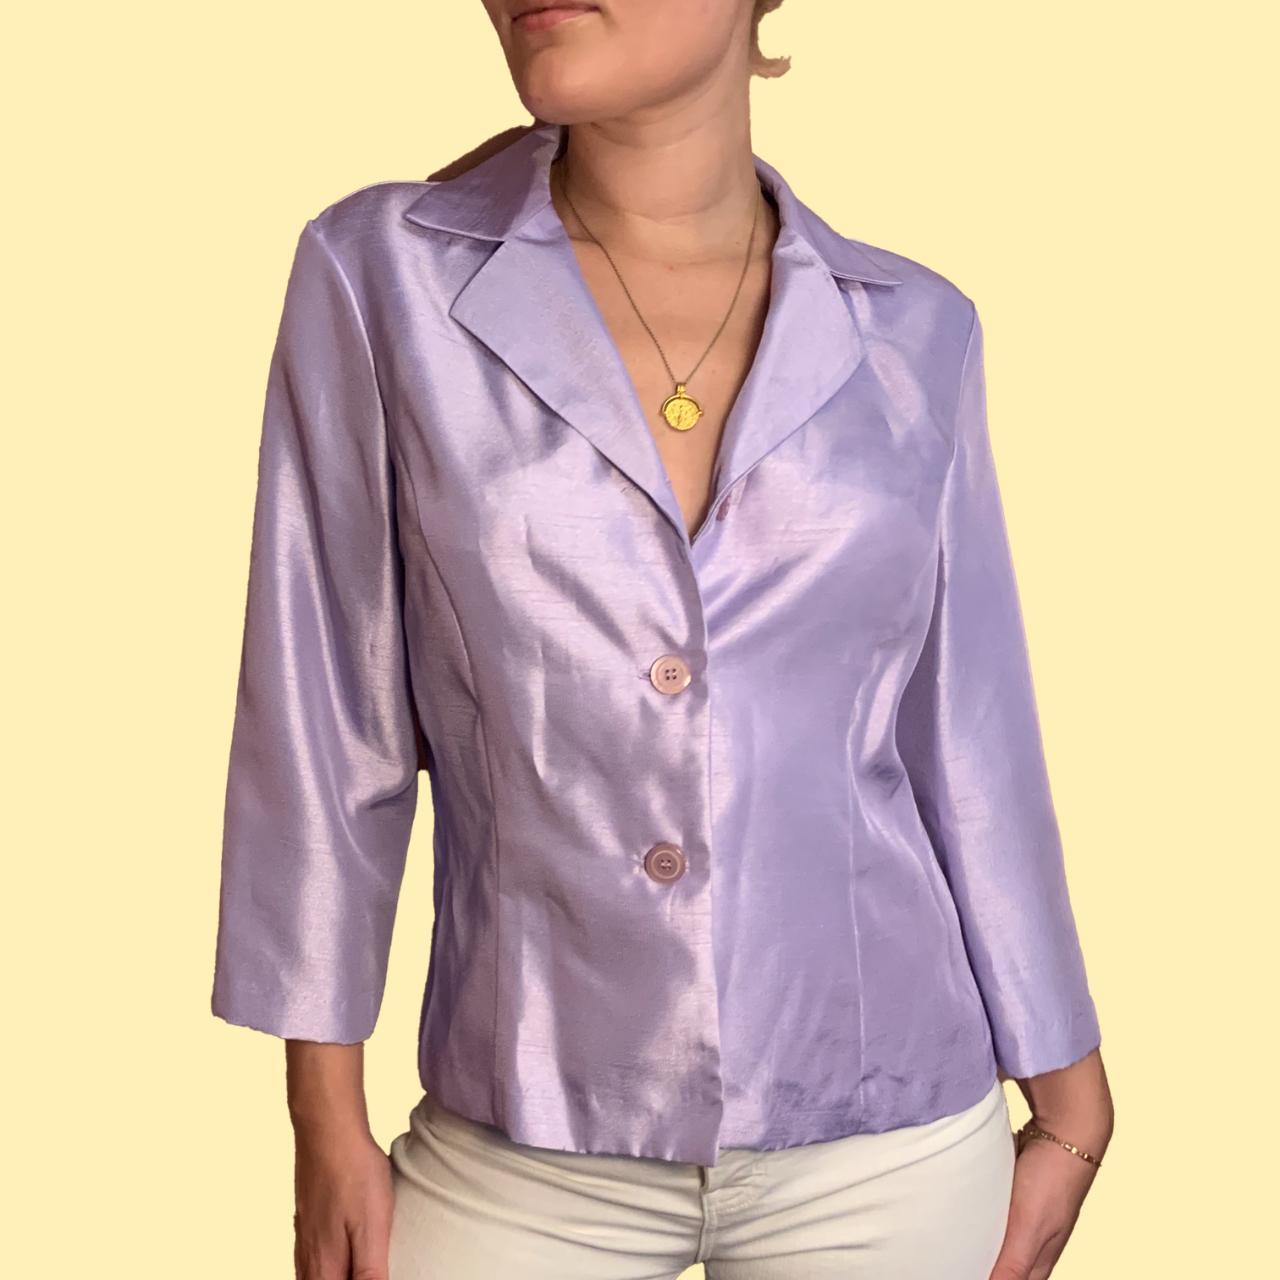 Product Image 1 - 80s women's bright violet satin